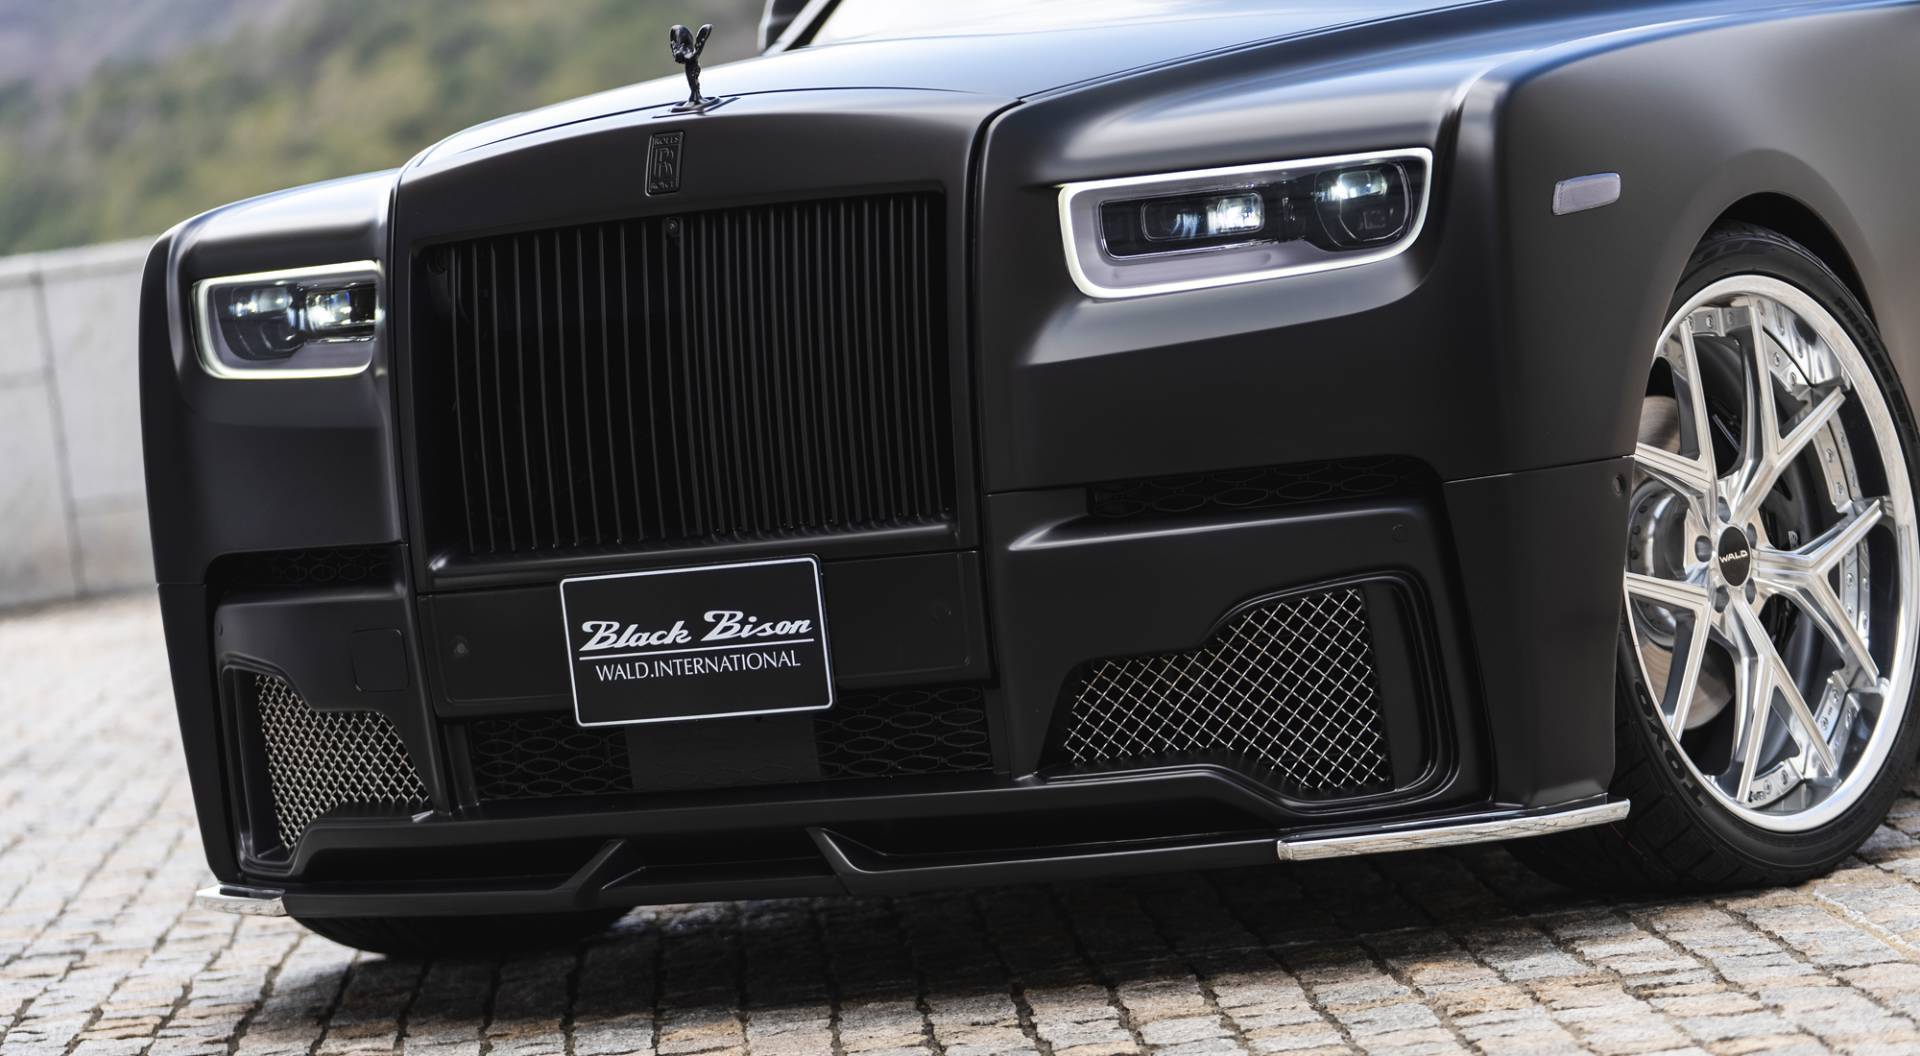 Photo Gallery Black Bison body kit for RollsRoyce Cullinan unveiled